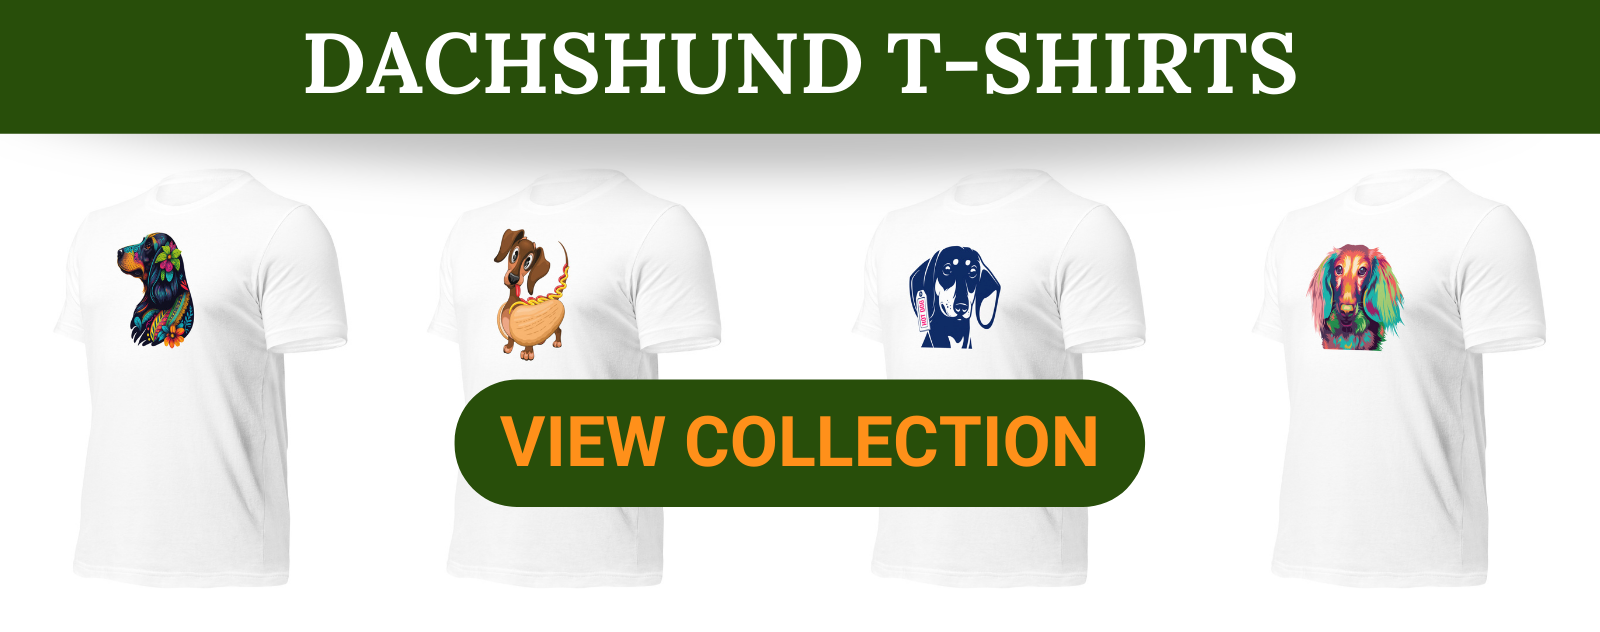 Dachshund T-shirts Collection